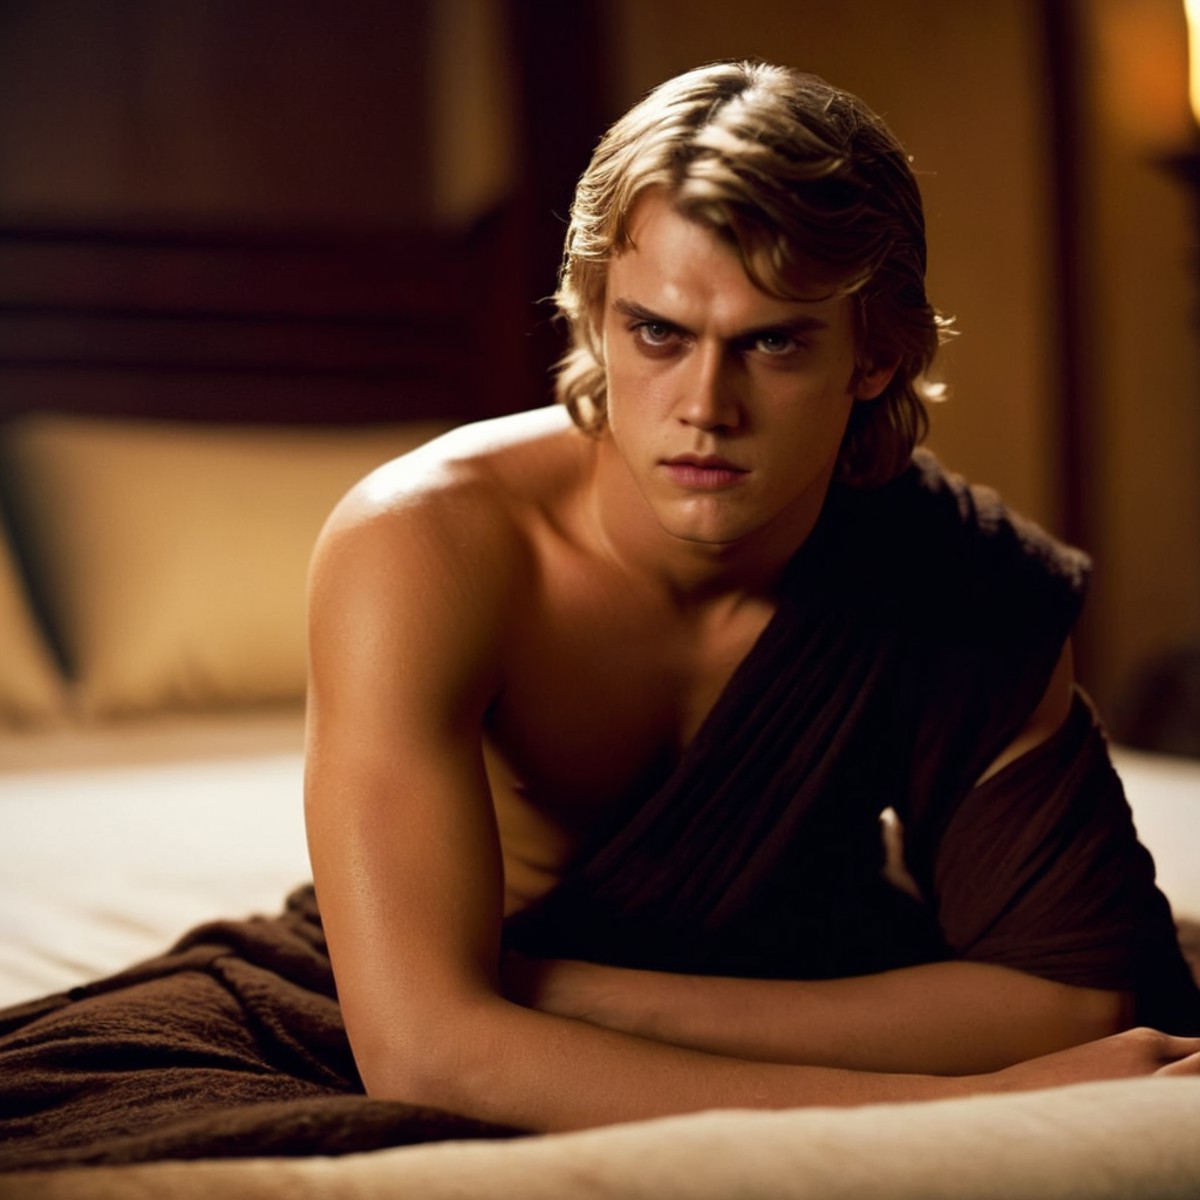 cinematic film still of  <lora:Anakin Skywalker:1.2>
Anakin Skywalker a shirtless man sitting on a bed with a perfect body...